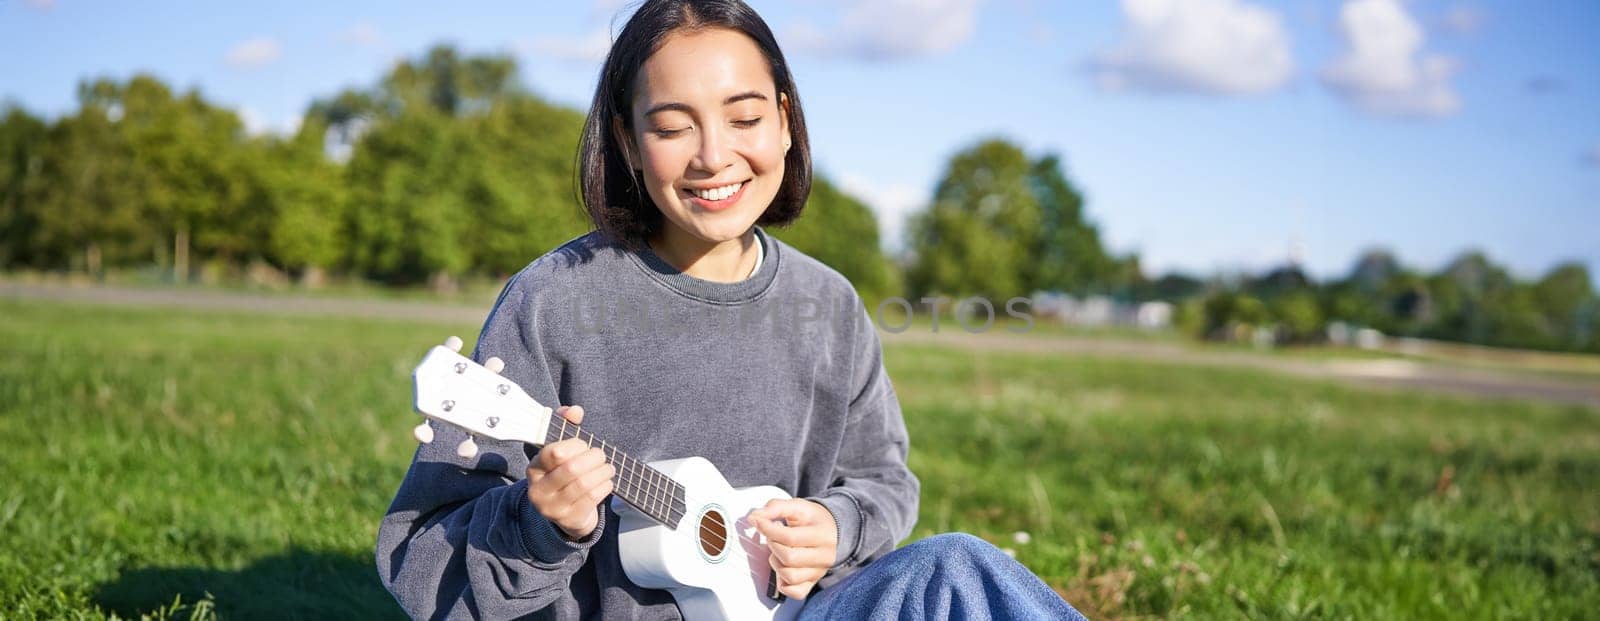 Carefree asian girl singing and playing ukulele in park, sitting on grass, musician relaxing on her free time outdoors by Benzoix